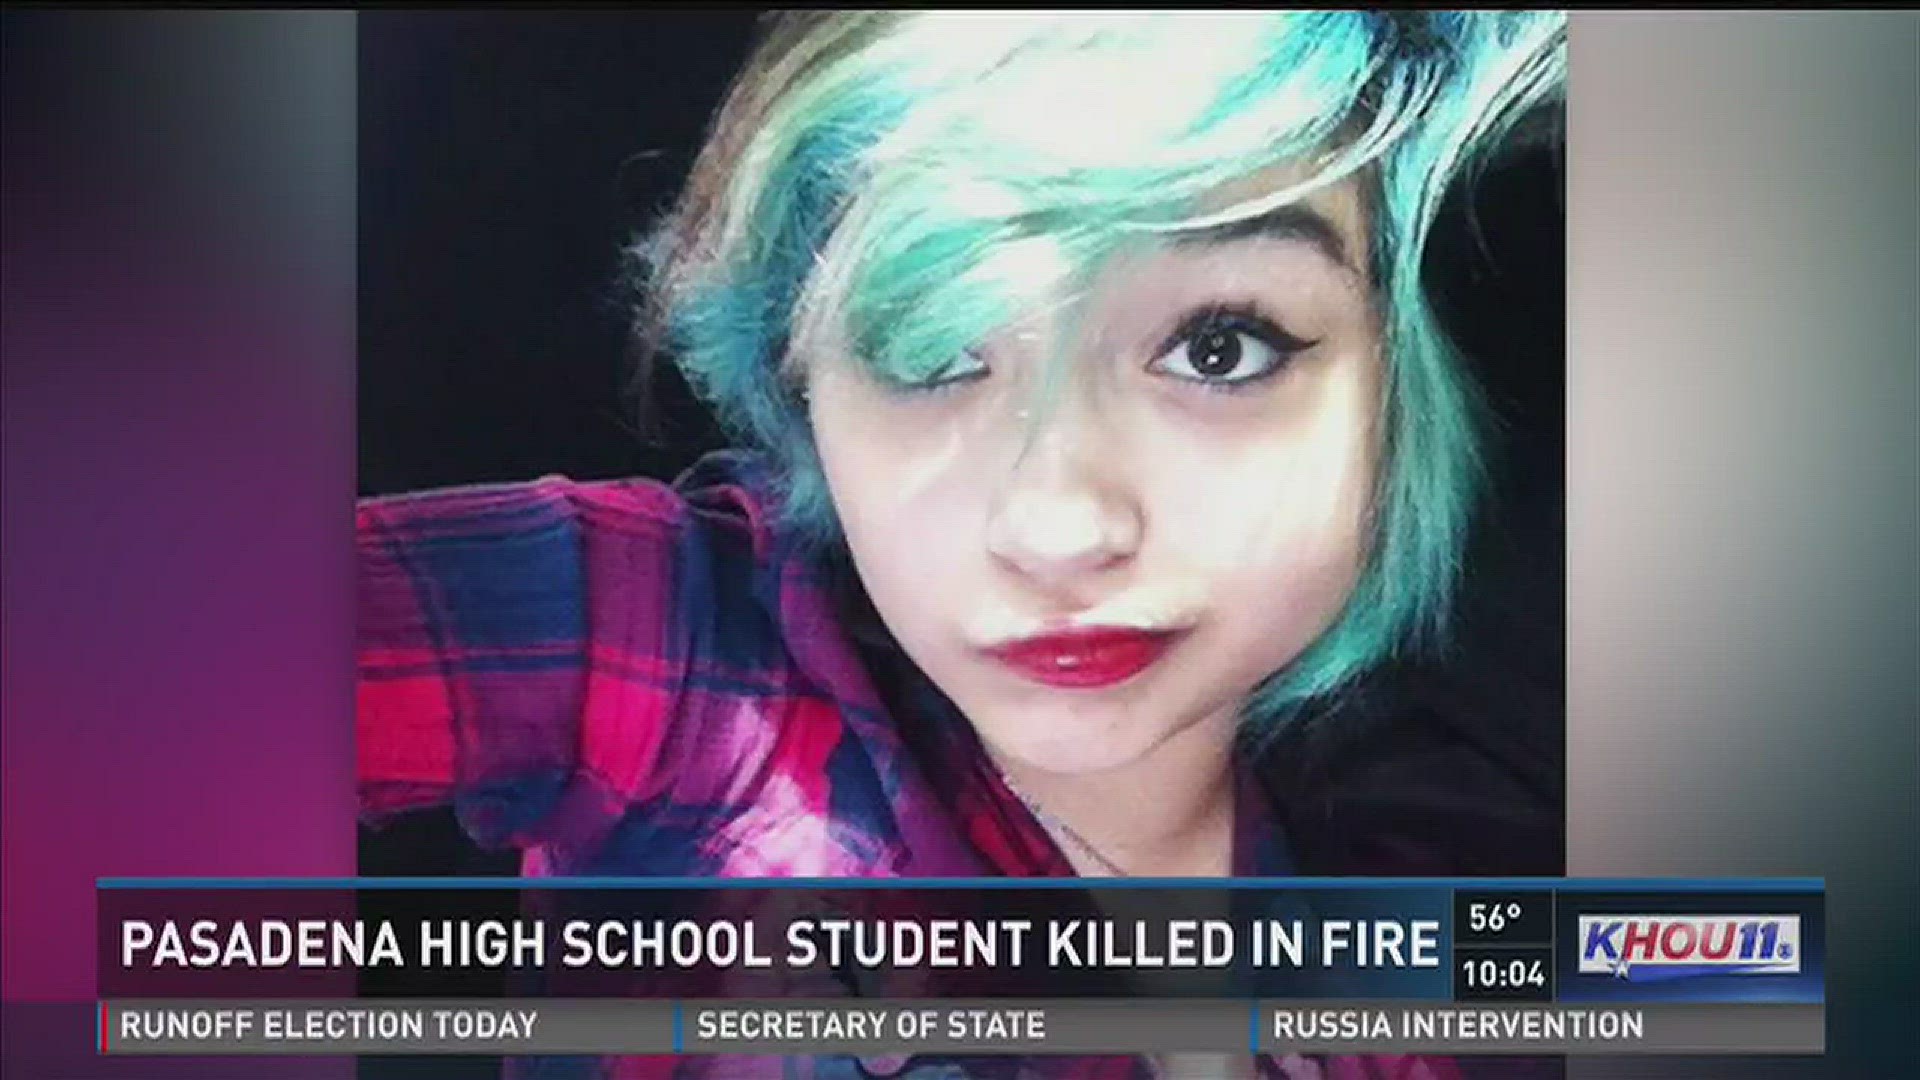 A 17 year old girl, Alma Adame, died in a house fire early Saturday morning. Adame's mother and grandmother were inside the home at the time and were able to make it out alive.